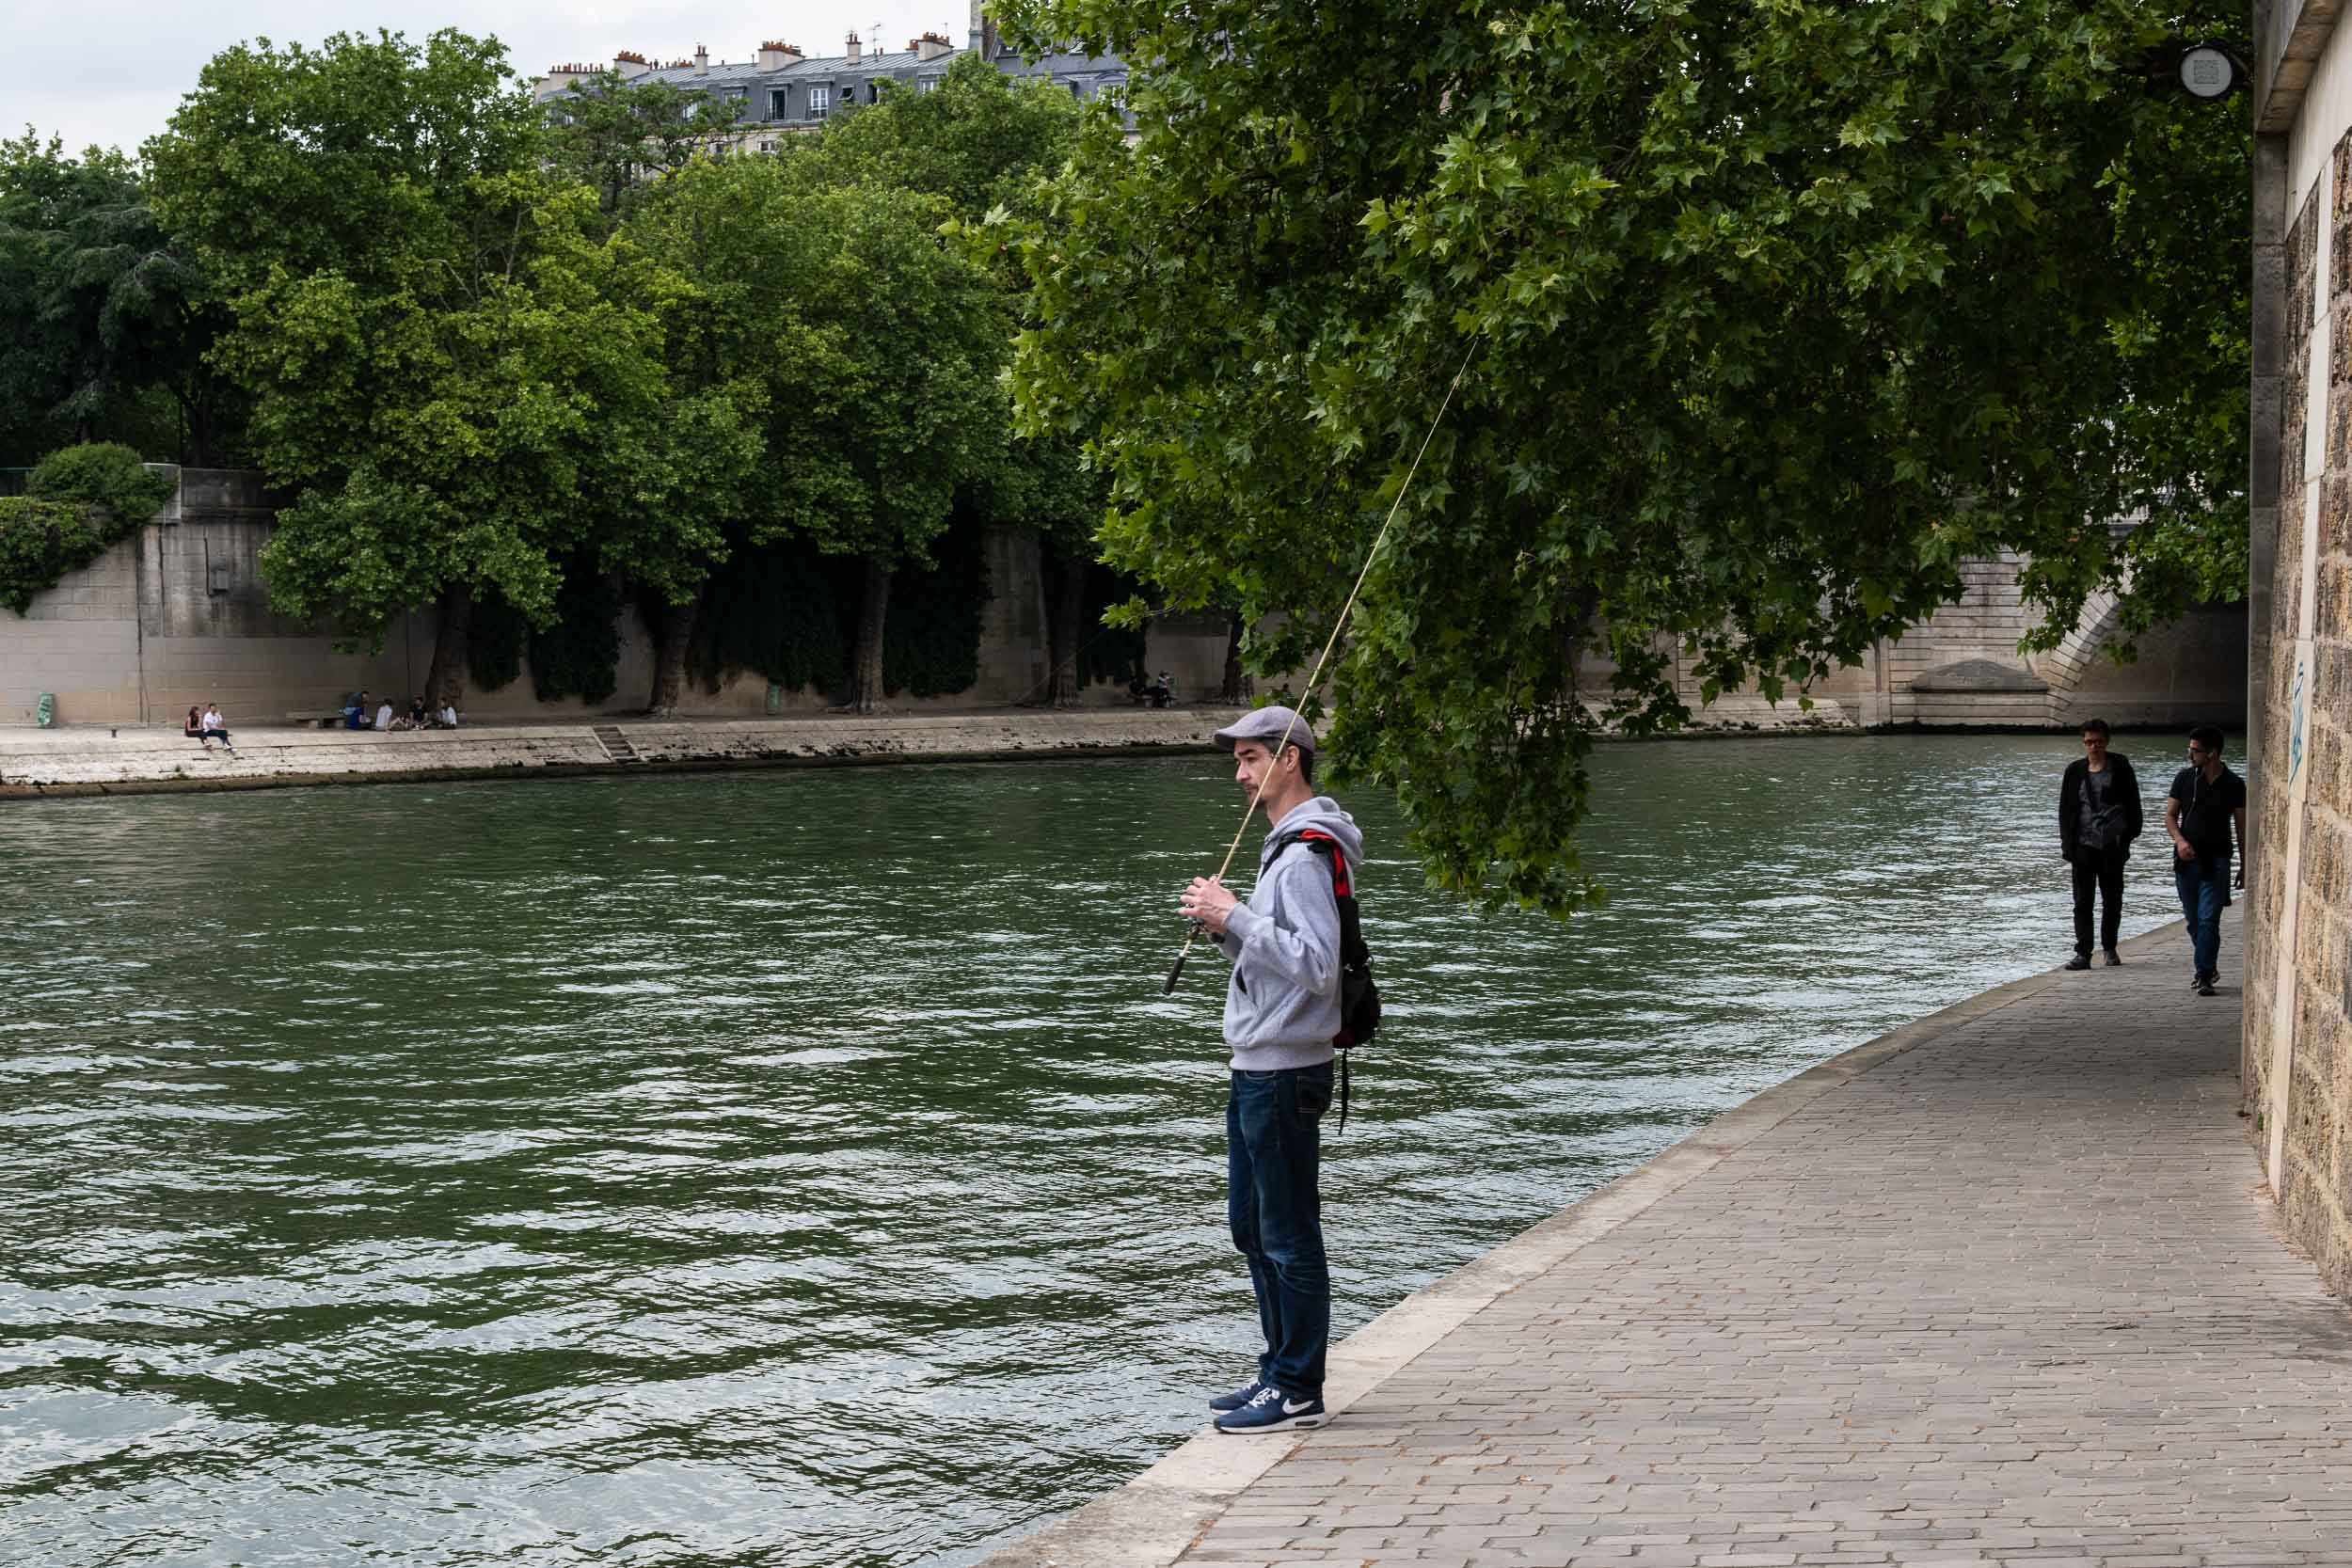 On Bank of the Seine